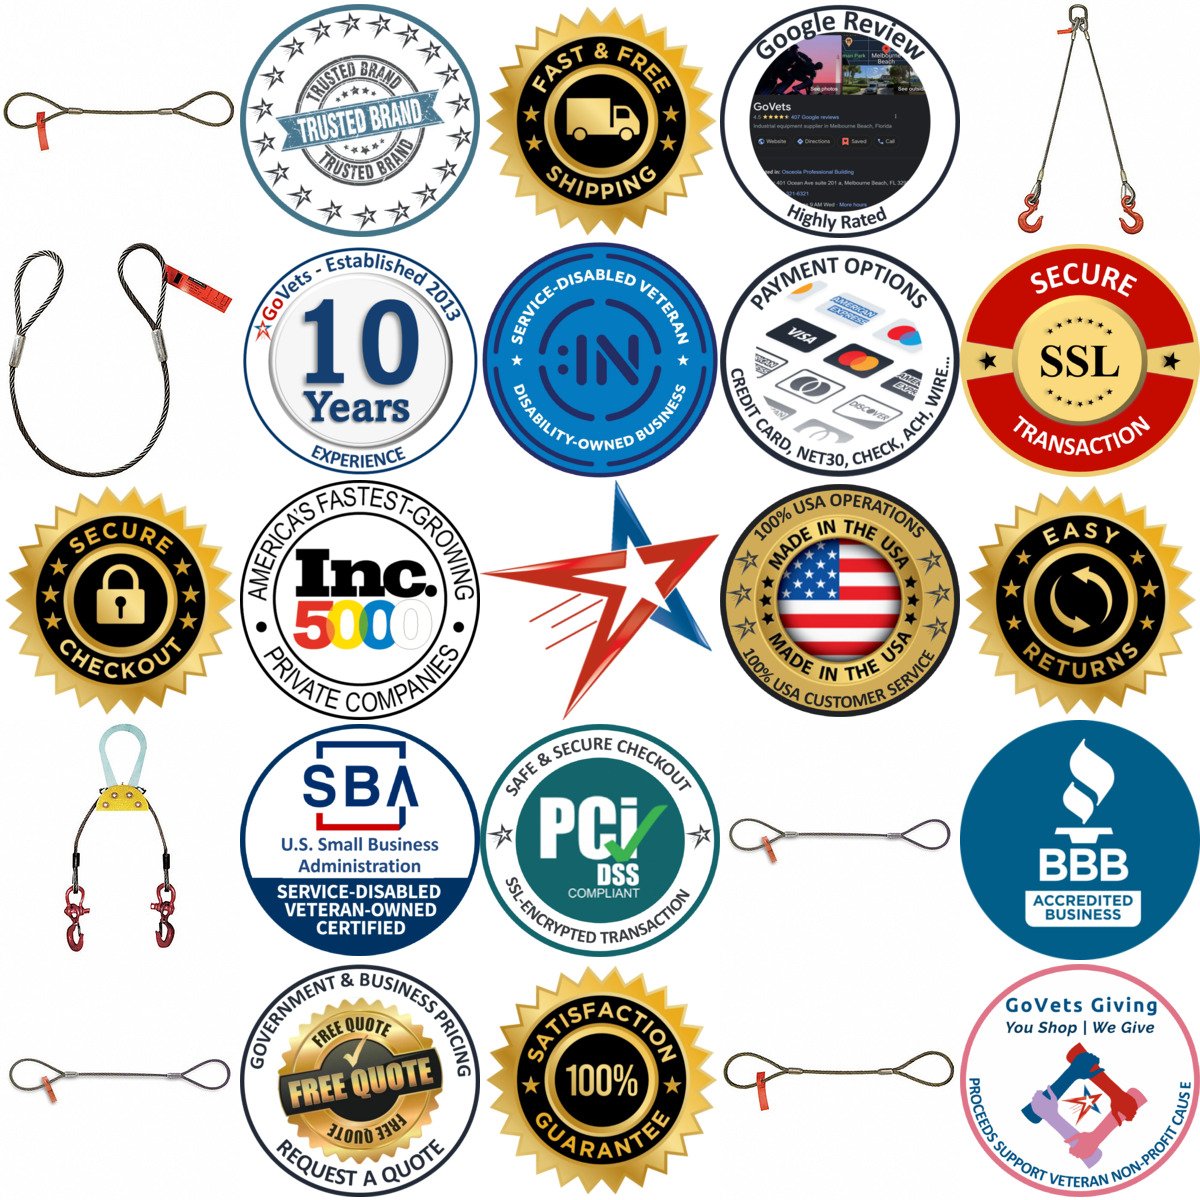 A selection of Wire Rope Slings products on GoVets